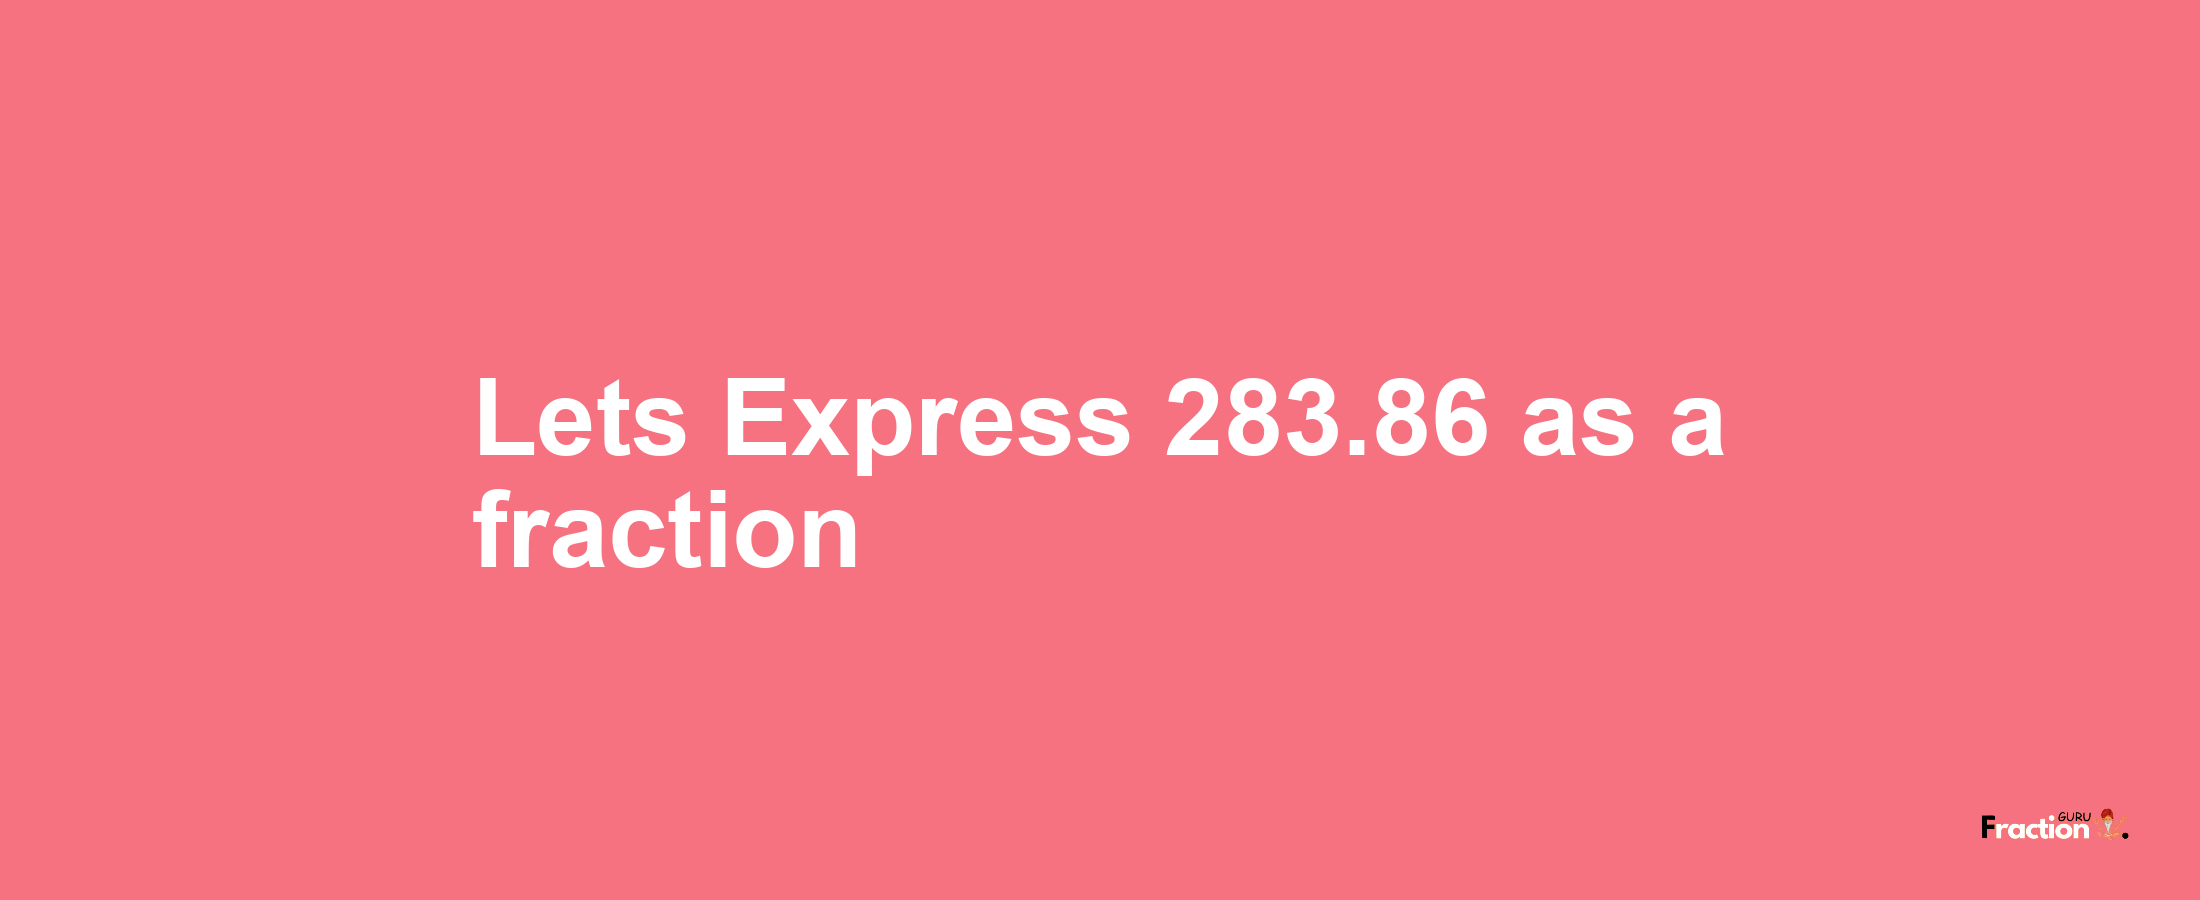 Lets Express 283.86 as afraction